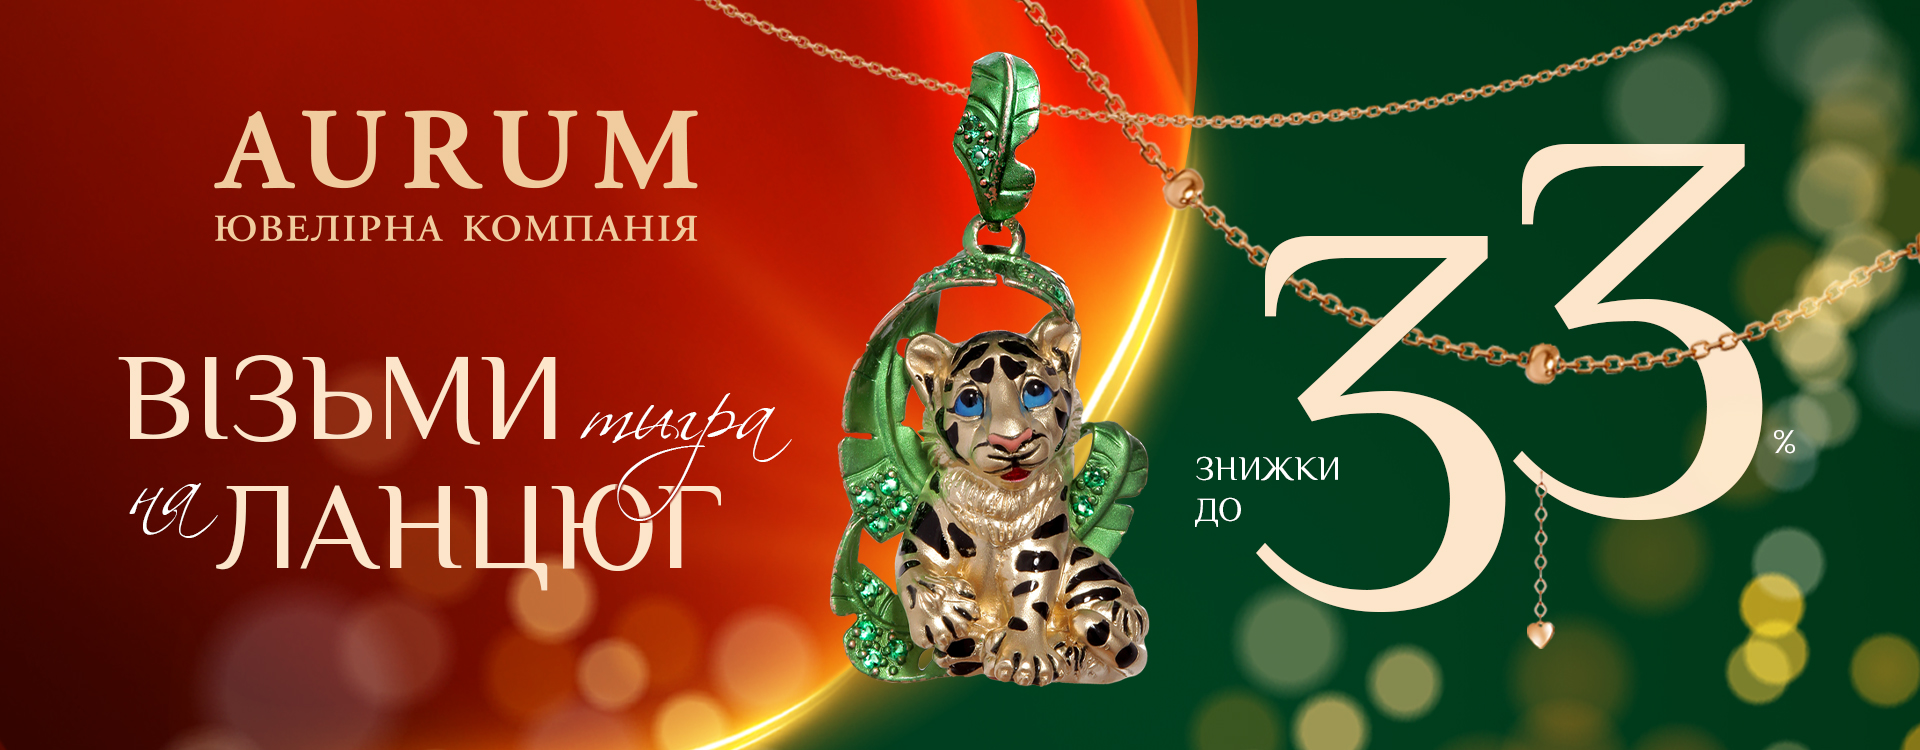 Take the Tiger on the chain from AURUM